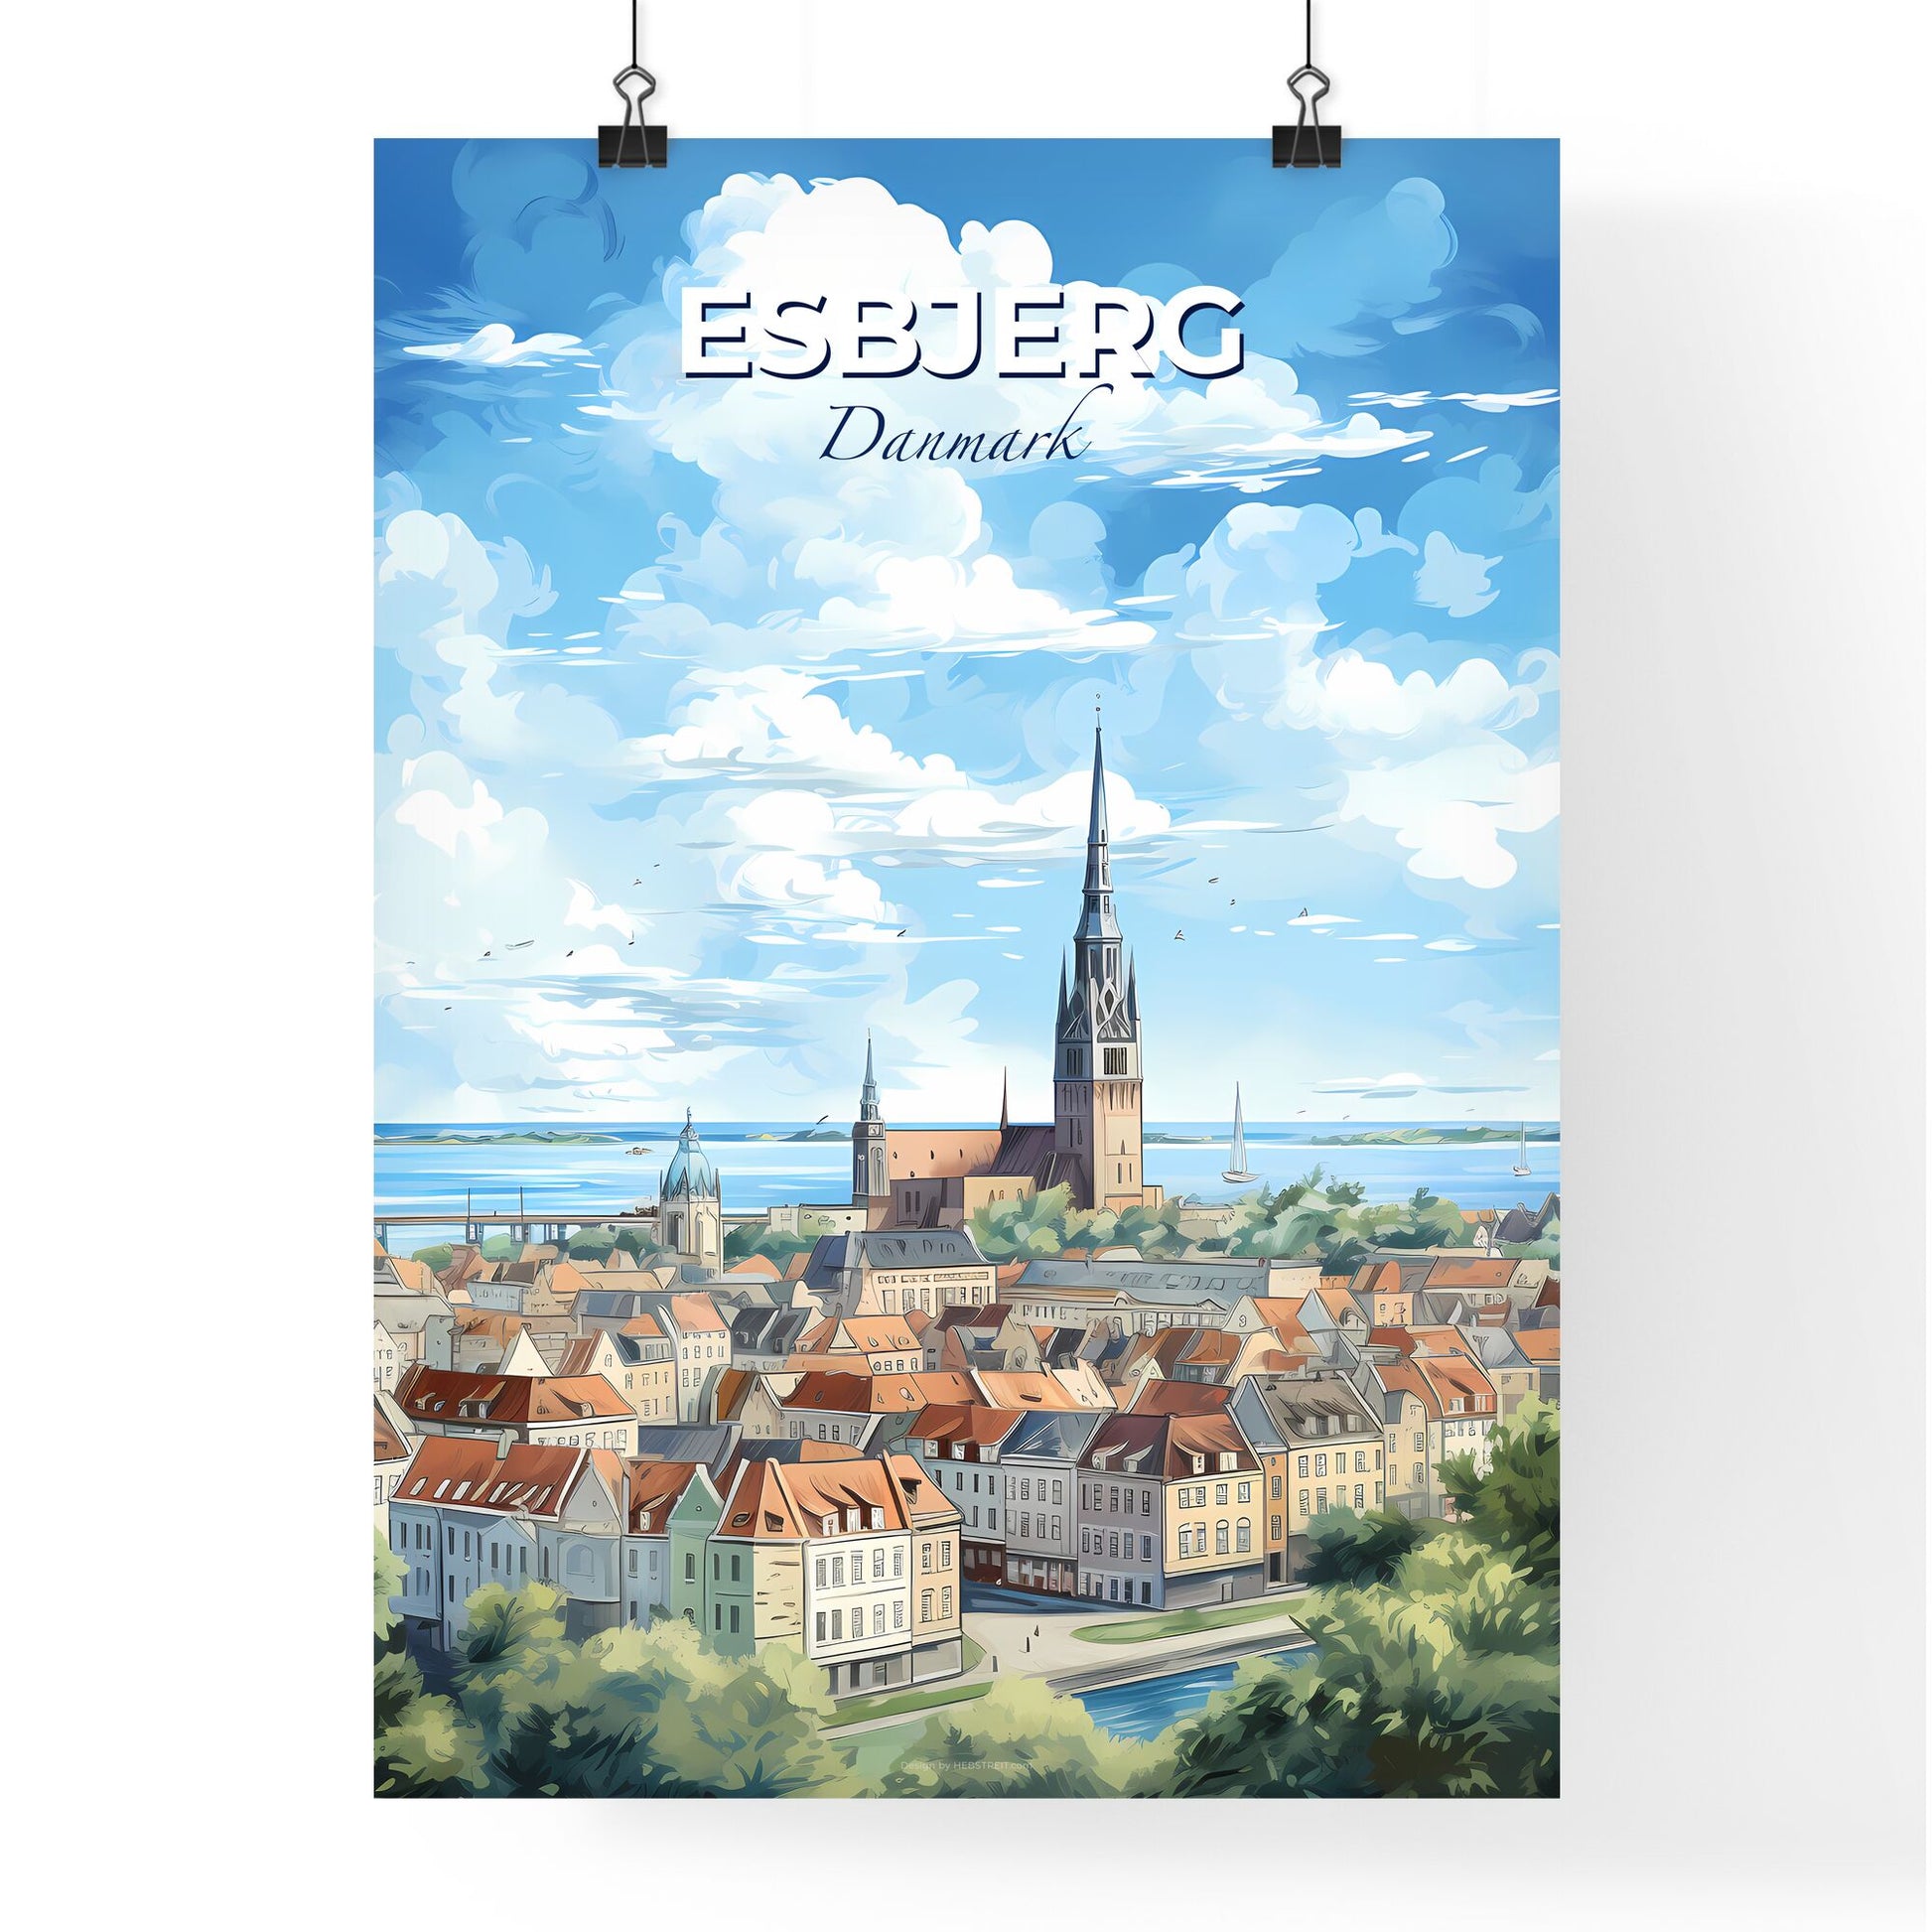 Esbjerg Danmark Skyline - A City With A Tall Tower And A Body Of Water - Customizable Travel Gift Default Title